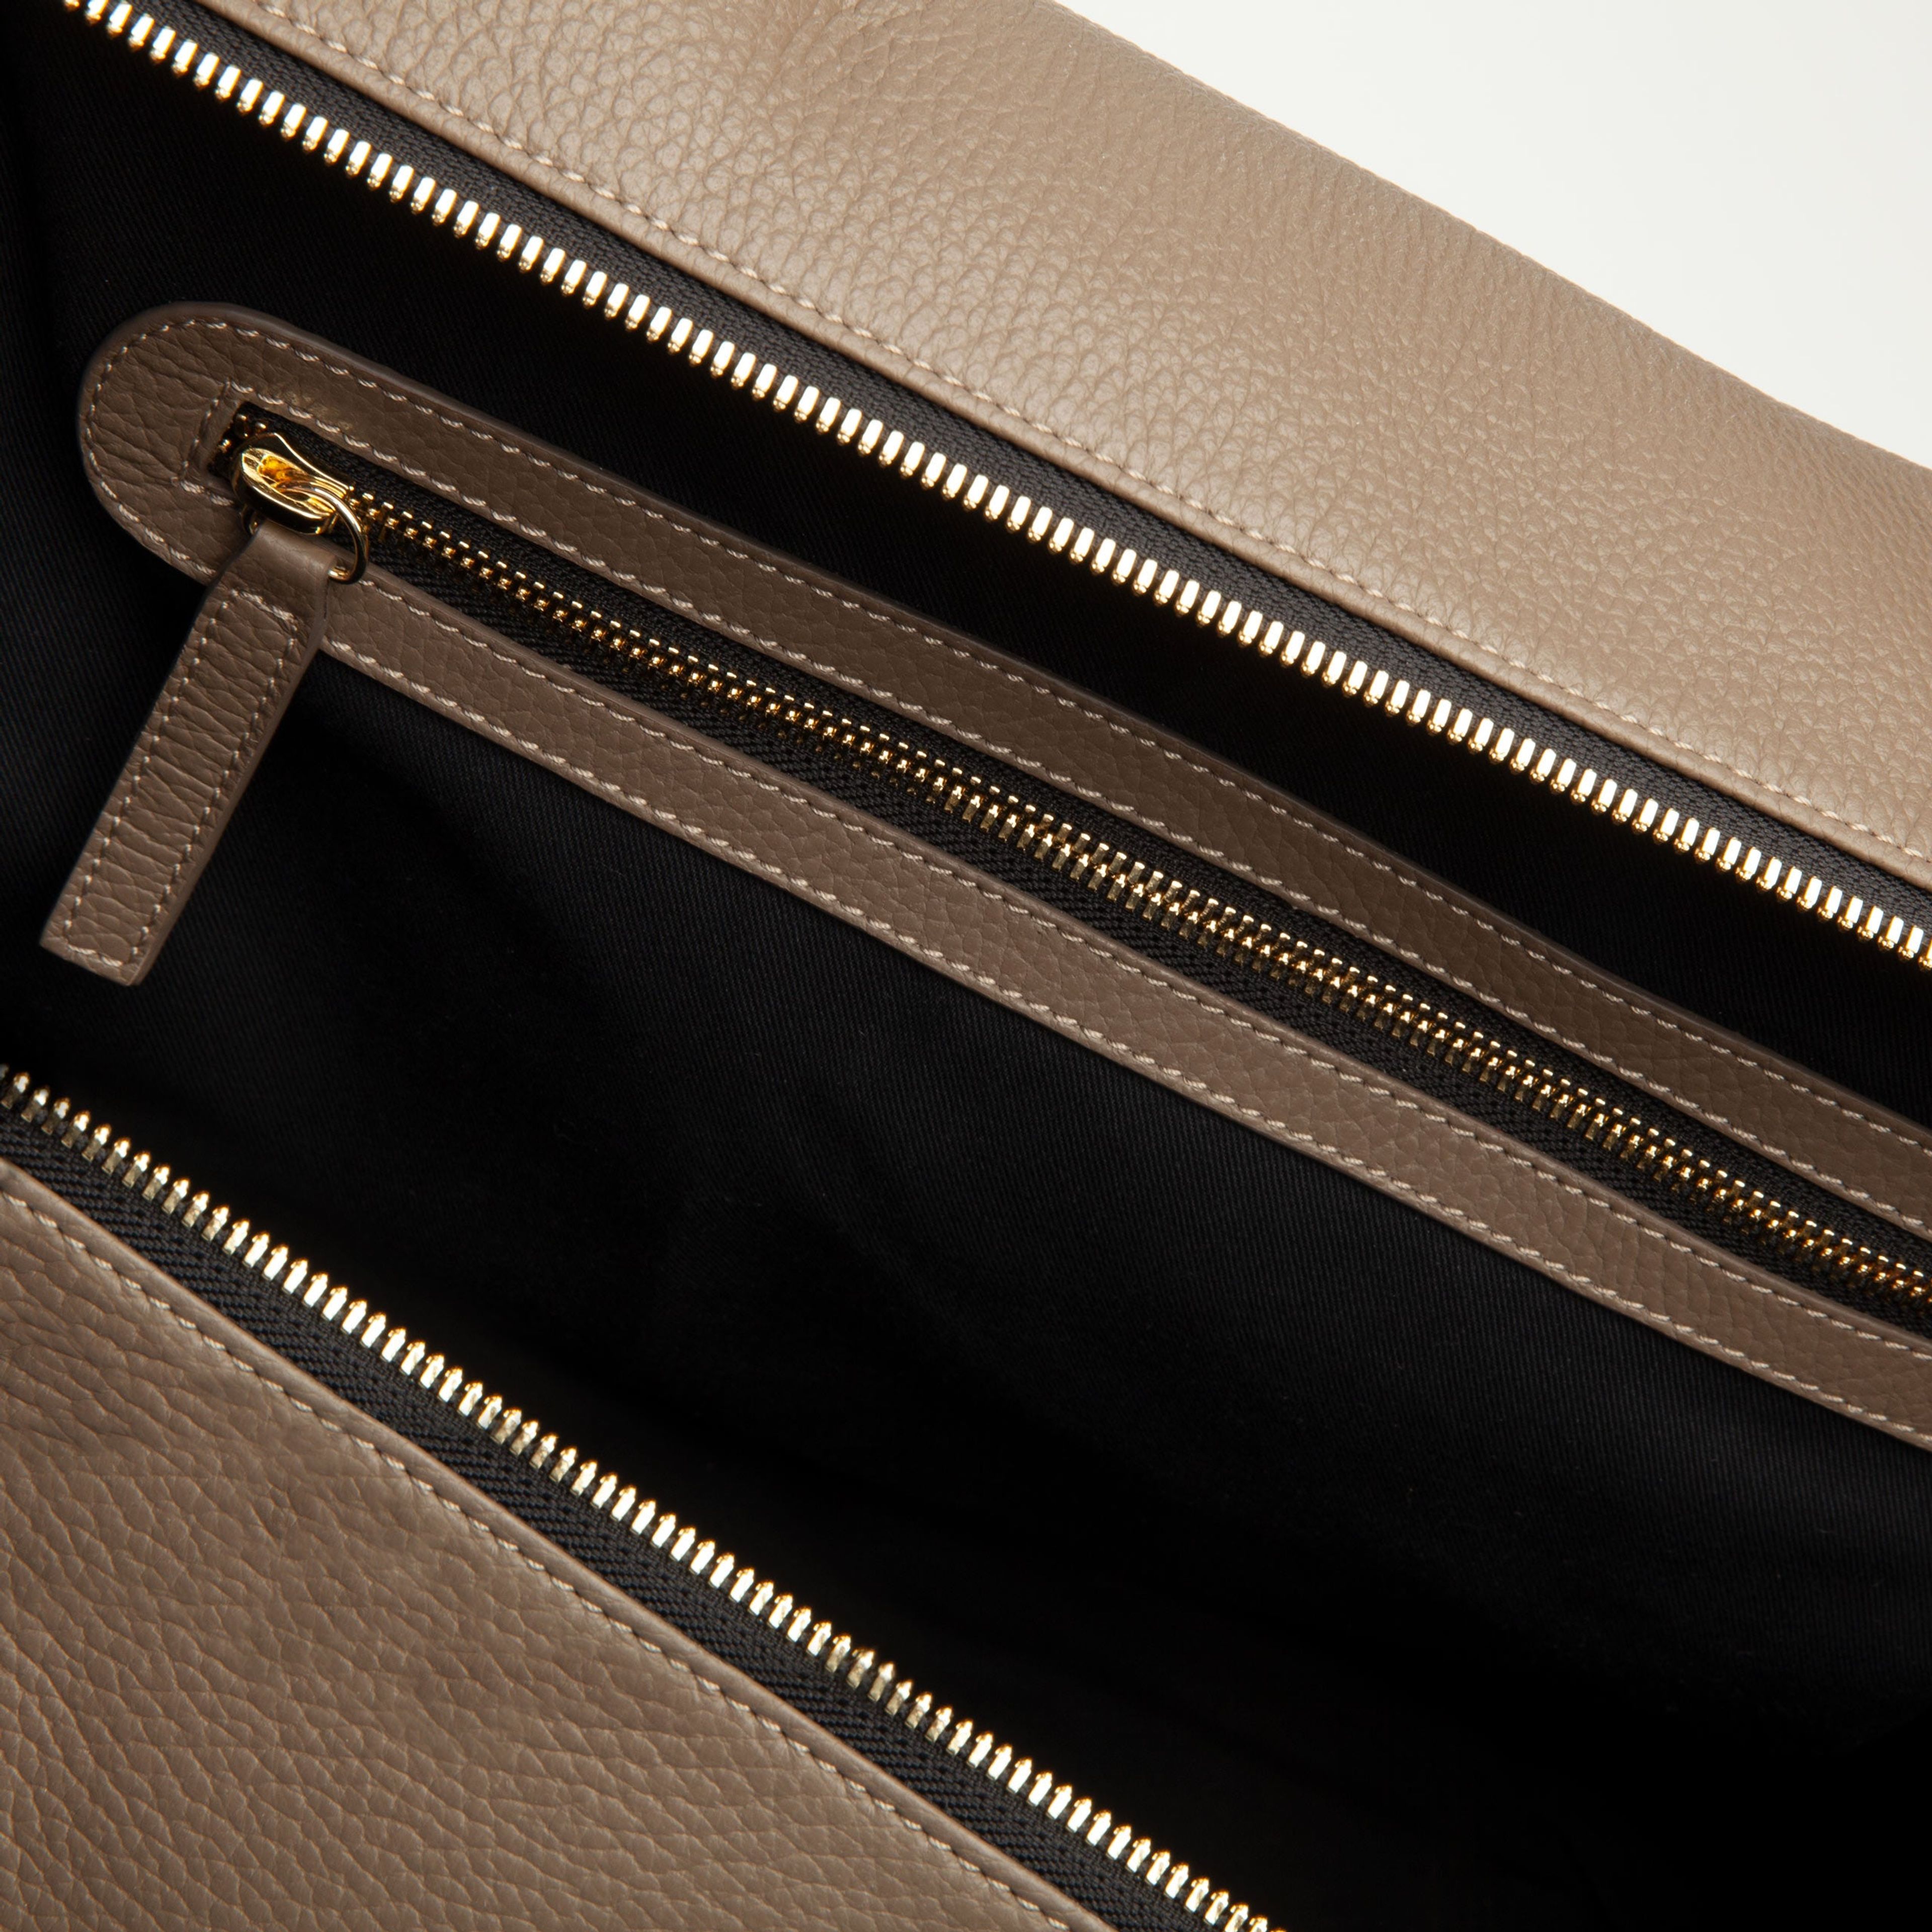 Hudson Italian Leather Weekender In Taupe